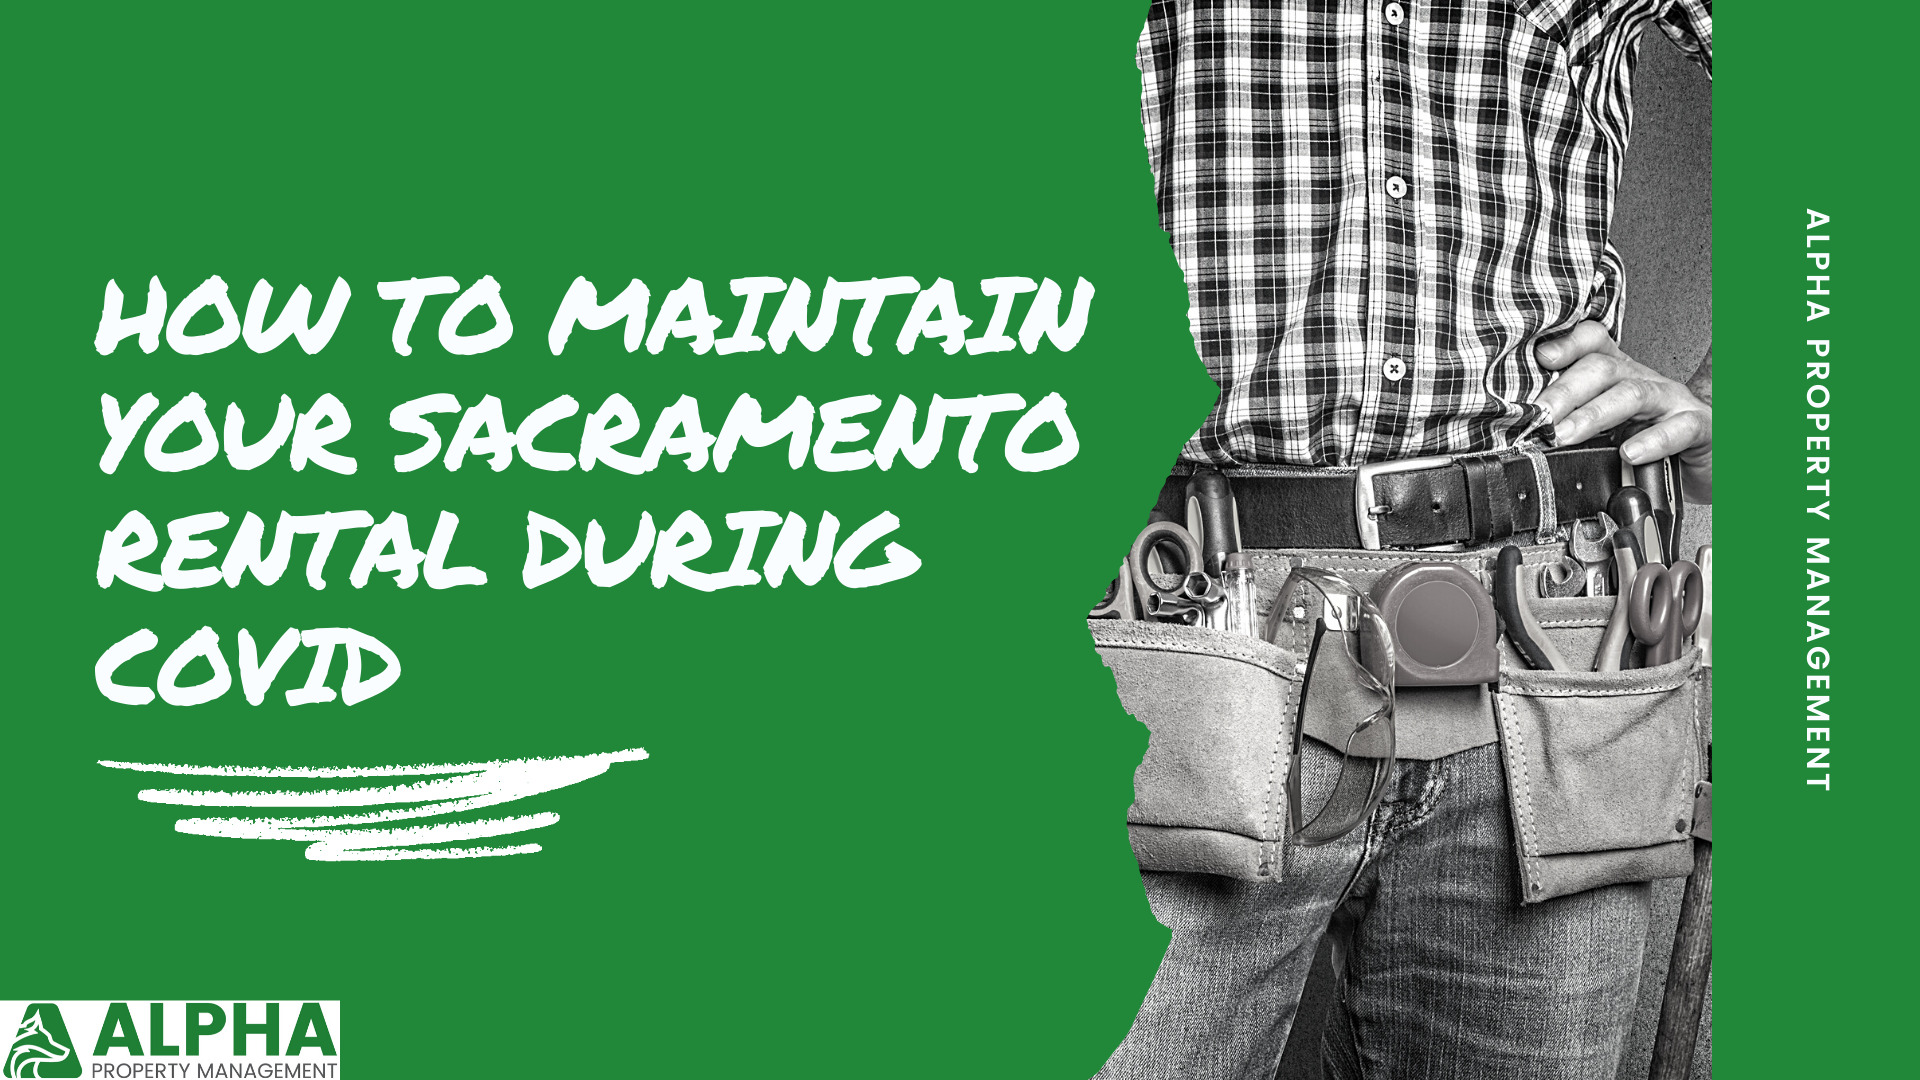 Picture of man with tool belt and text - How to maintain your Sacramento Rental during COVID